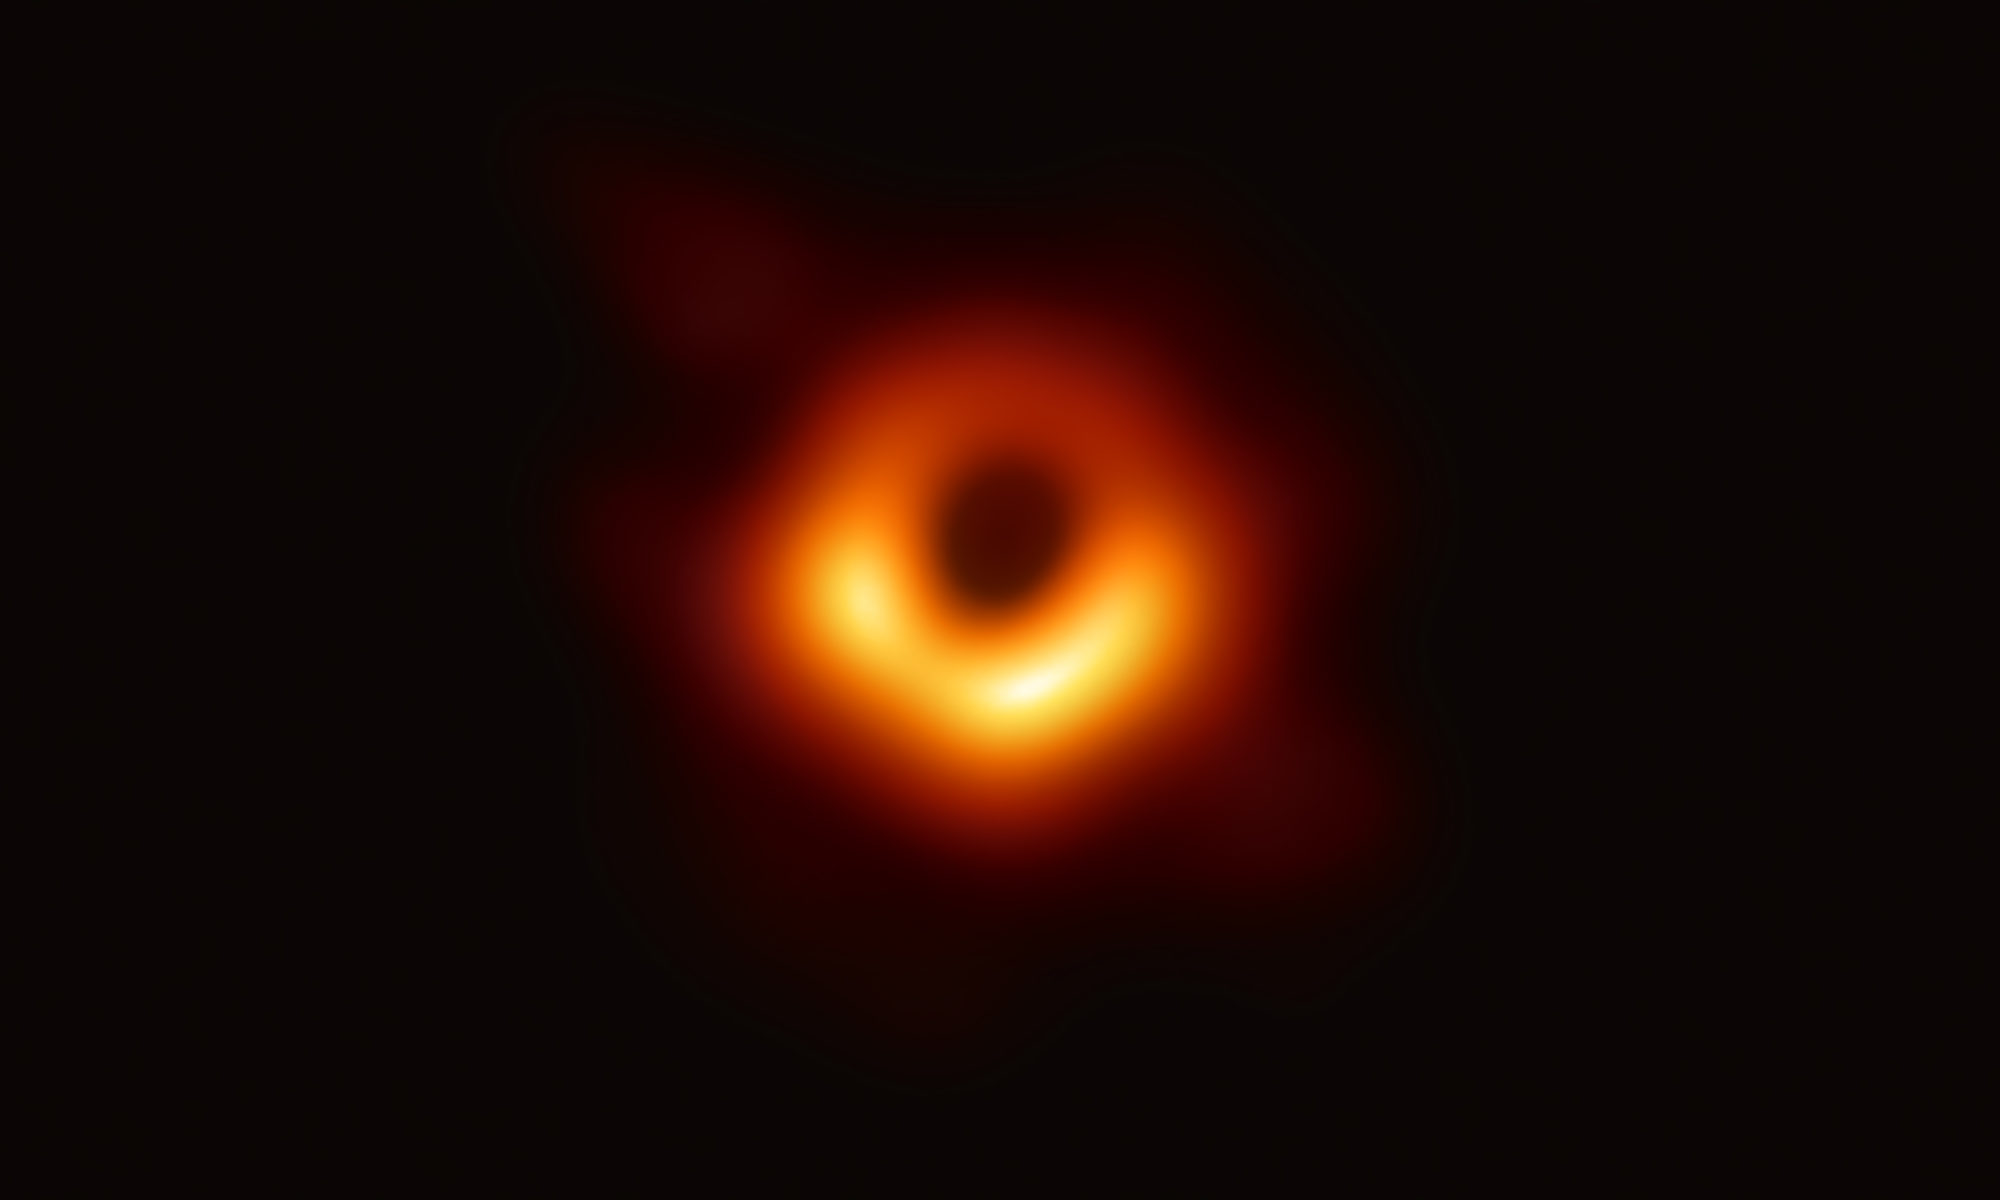 Astronomers capture first image of a black hole